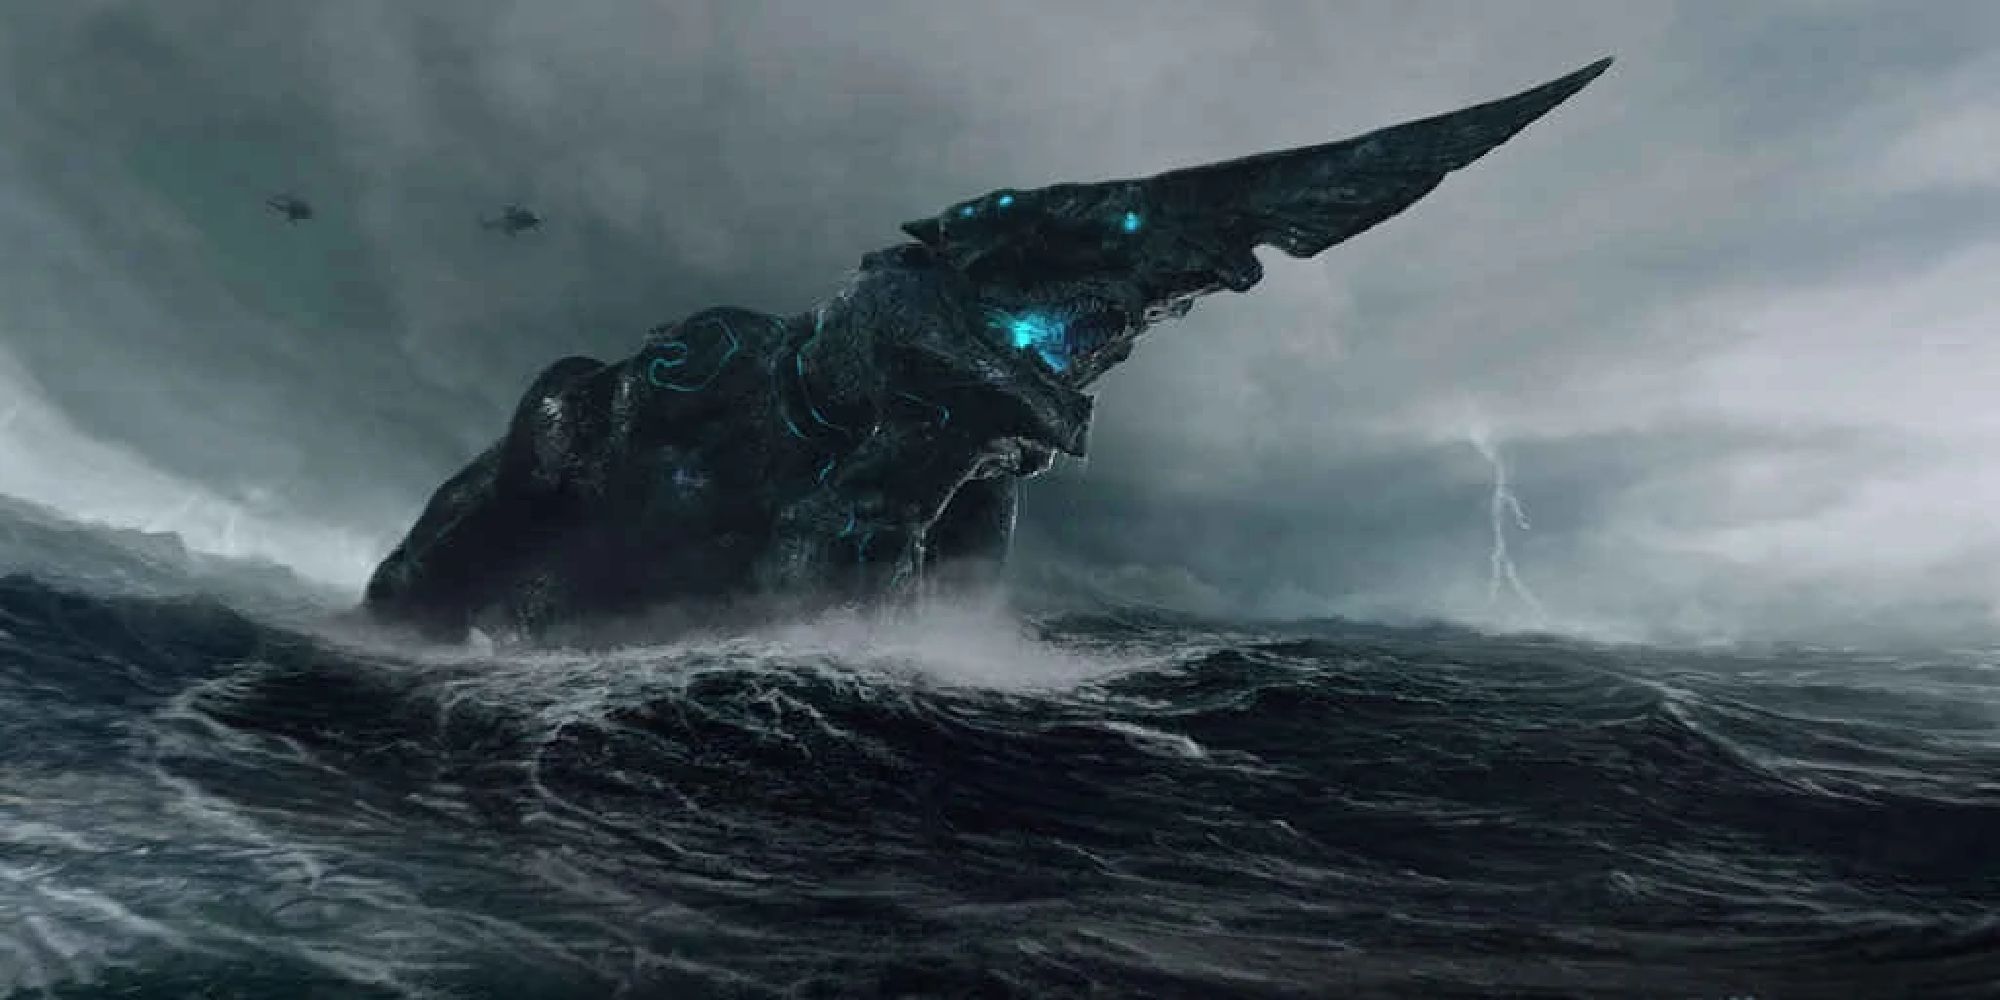 The pointy-headed kaiju Knifehead emerging from the raging seas